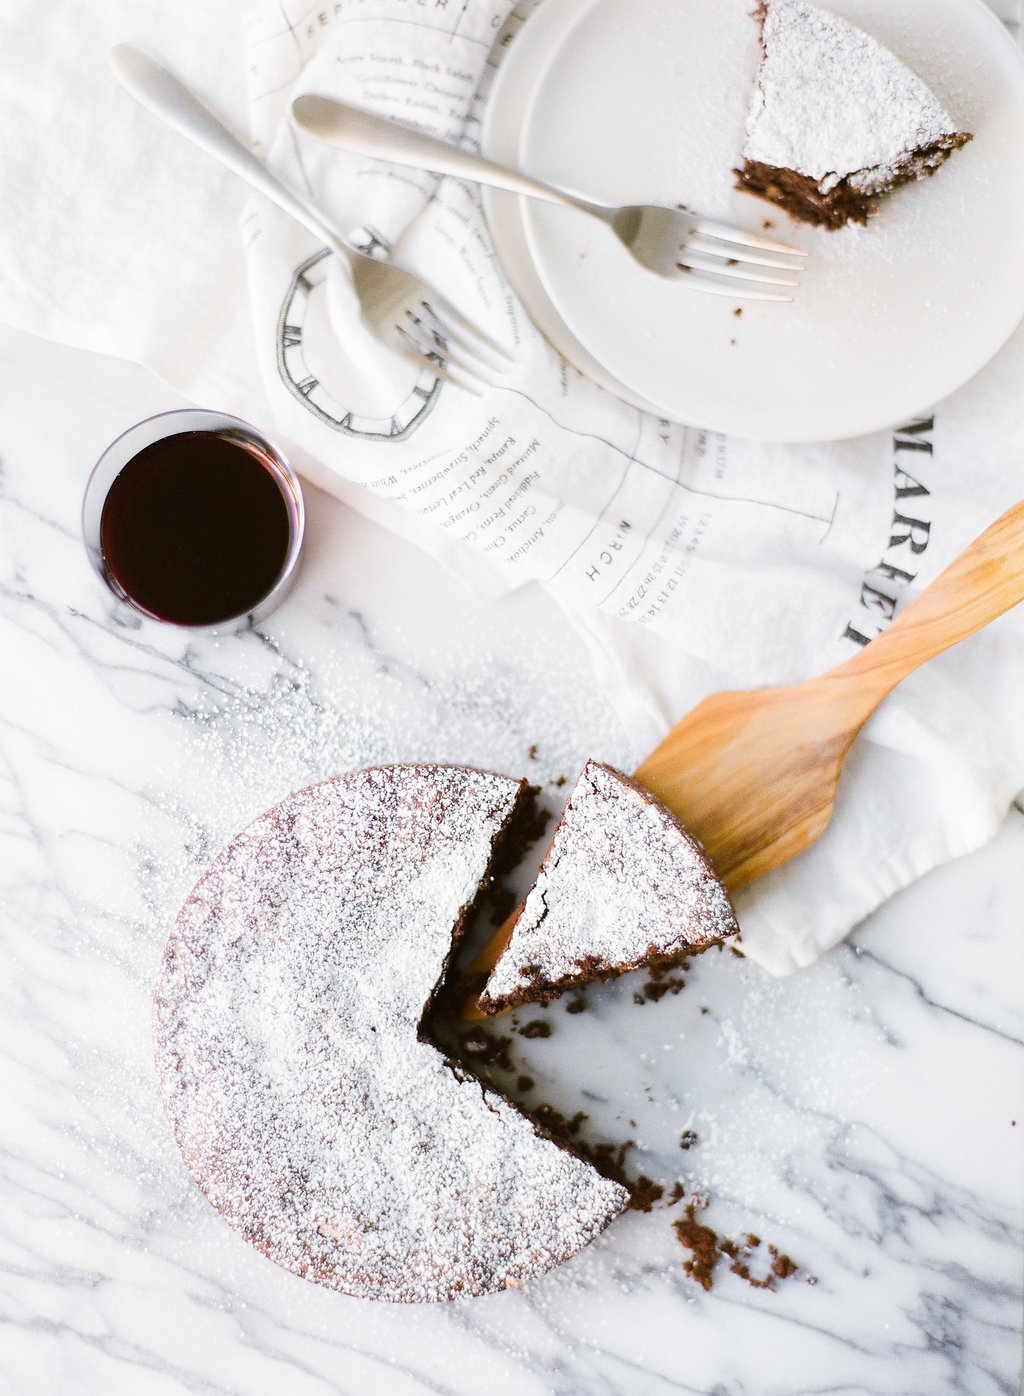 Now, what would a birthday party be without some cake?! Lucky for you, dessert is my favorite part of the celebration so we are sharing this delicious Dark Chocolate Olive Oil cake. Serve up some slices with a beautiful glass of Kendall-Jackson Merlot and you'll experience a true match made in heaven.